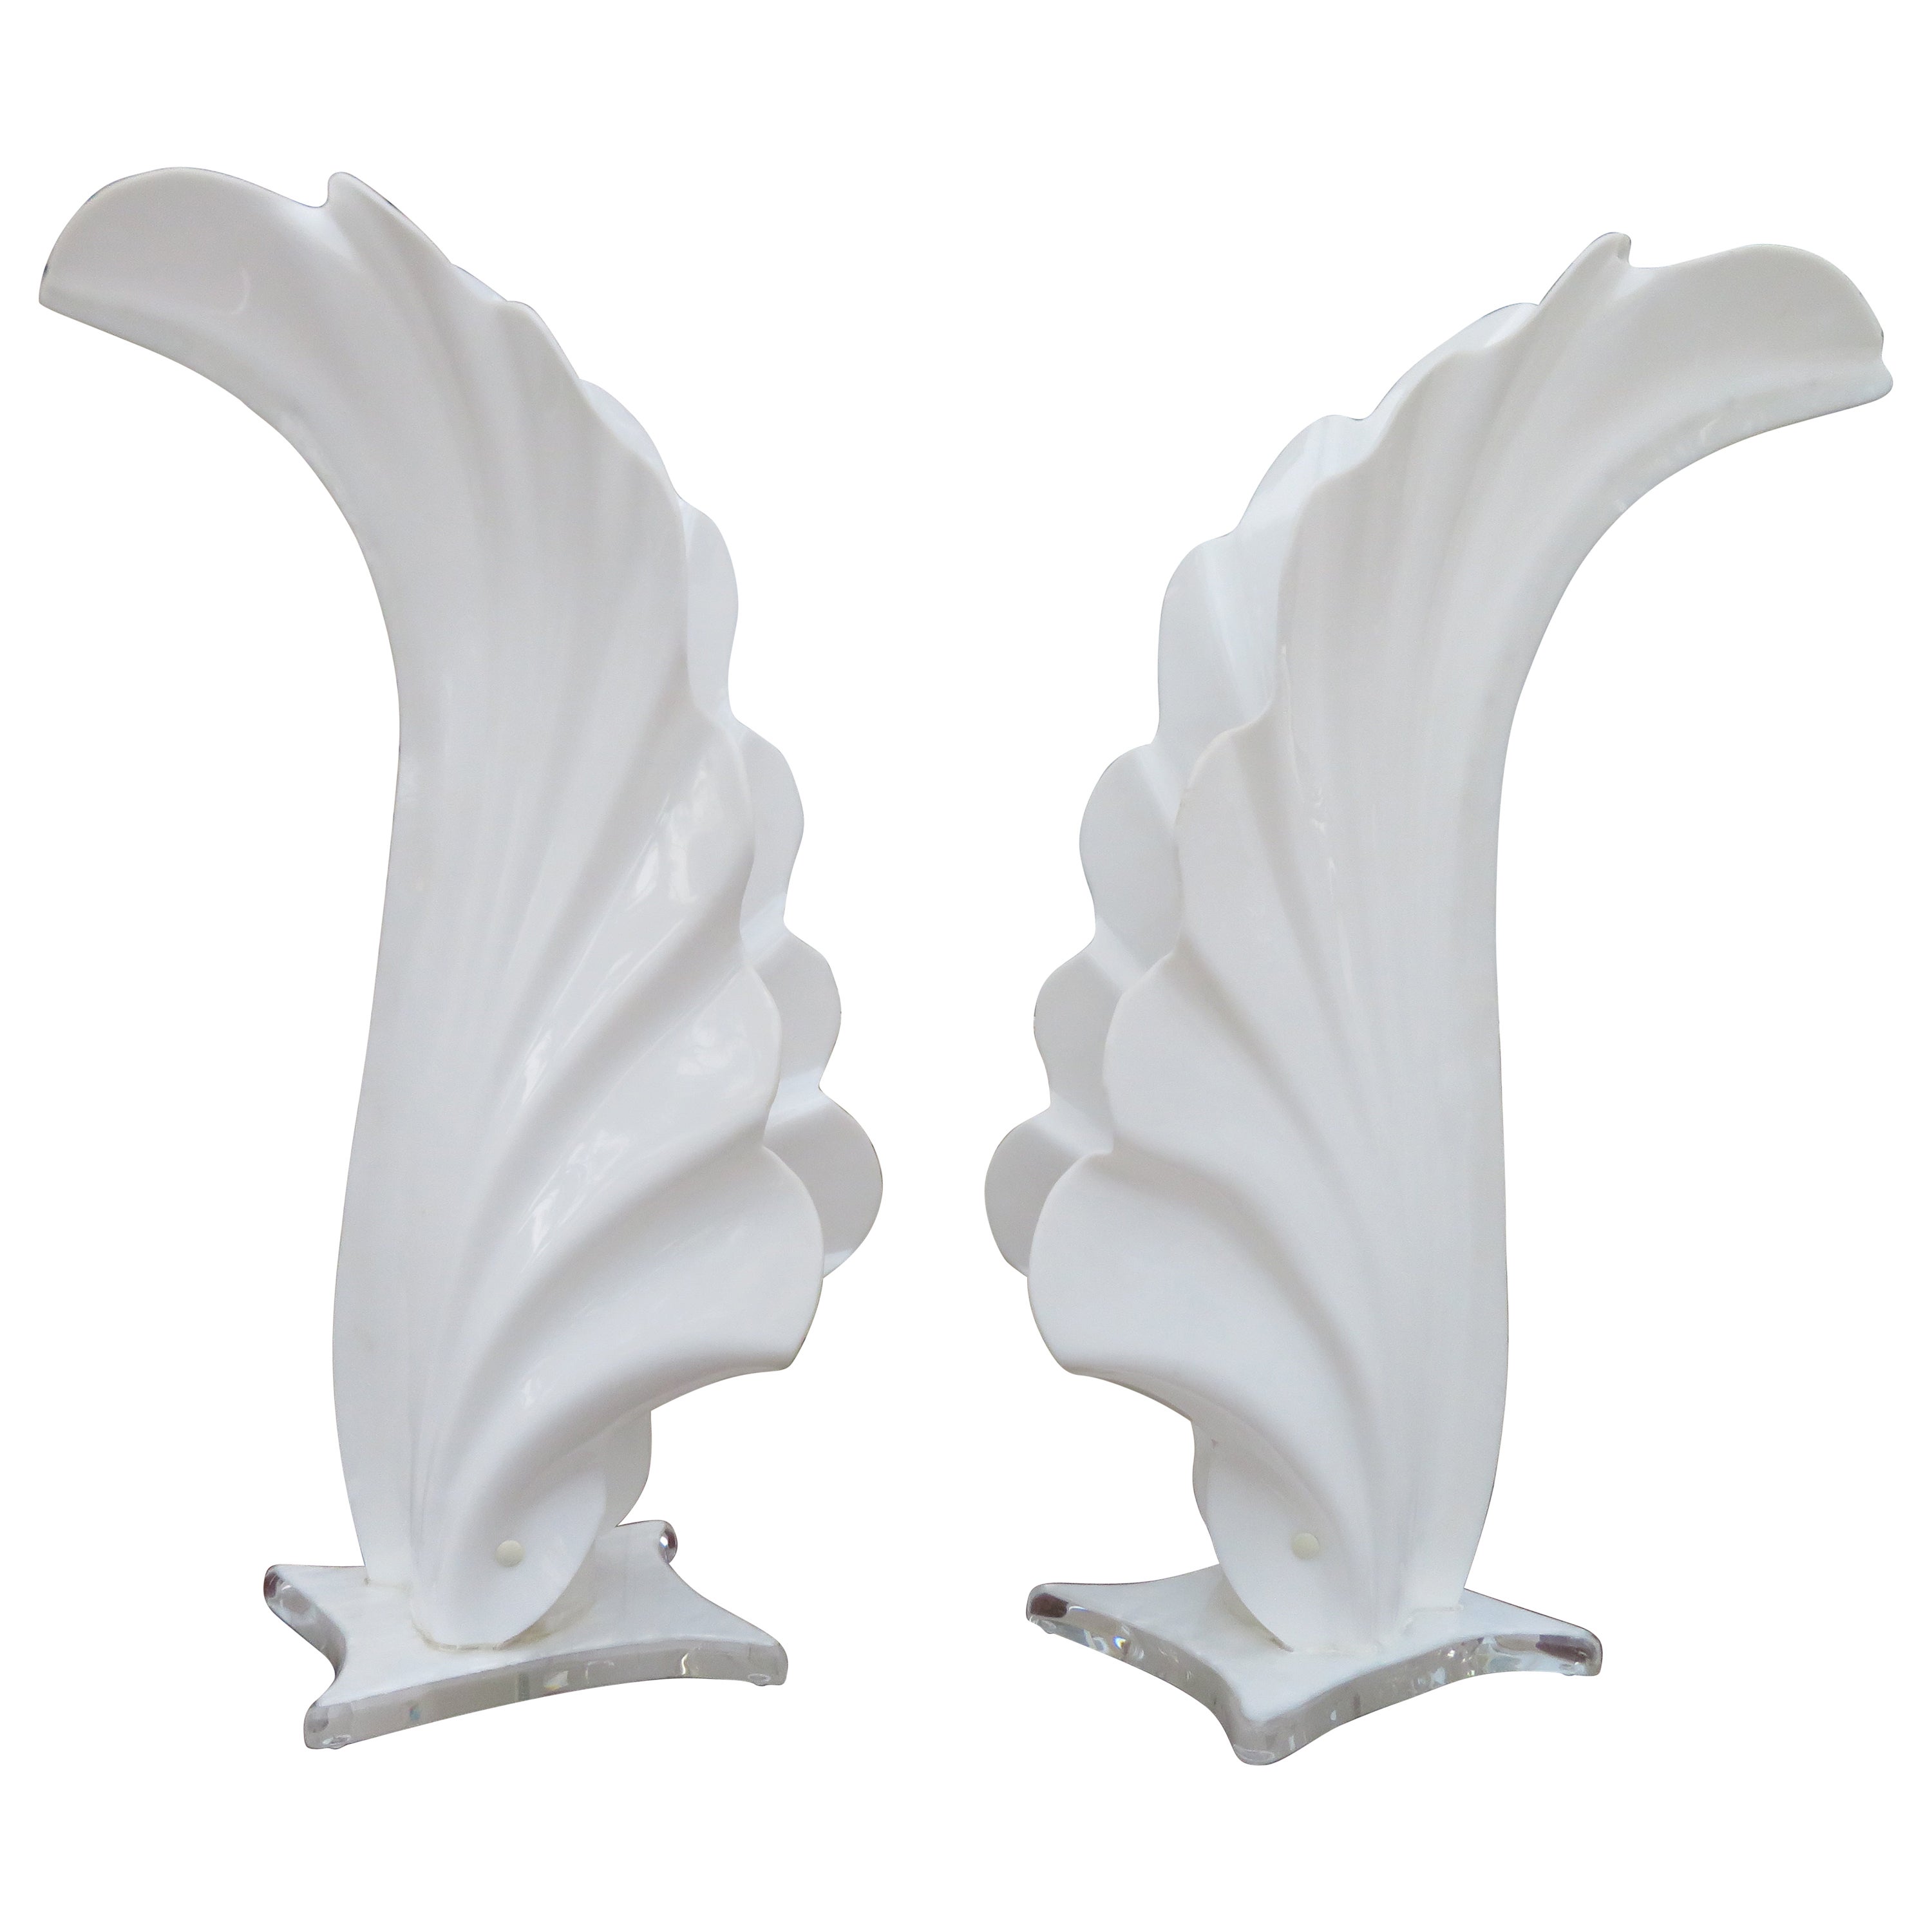 Superb Pair of Monumental White Acrylic Flower Table Lamp by Rougier For Sale